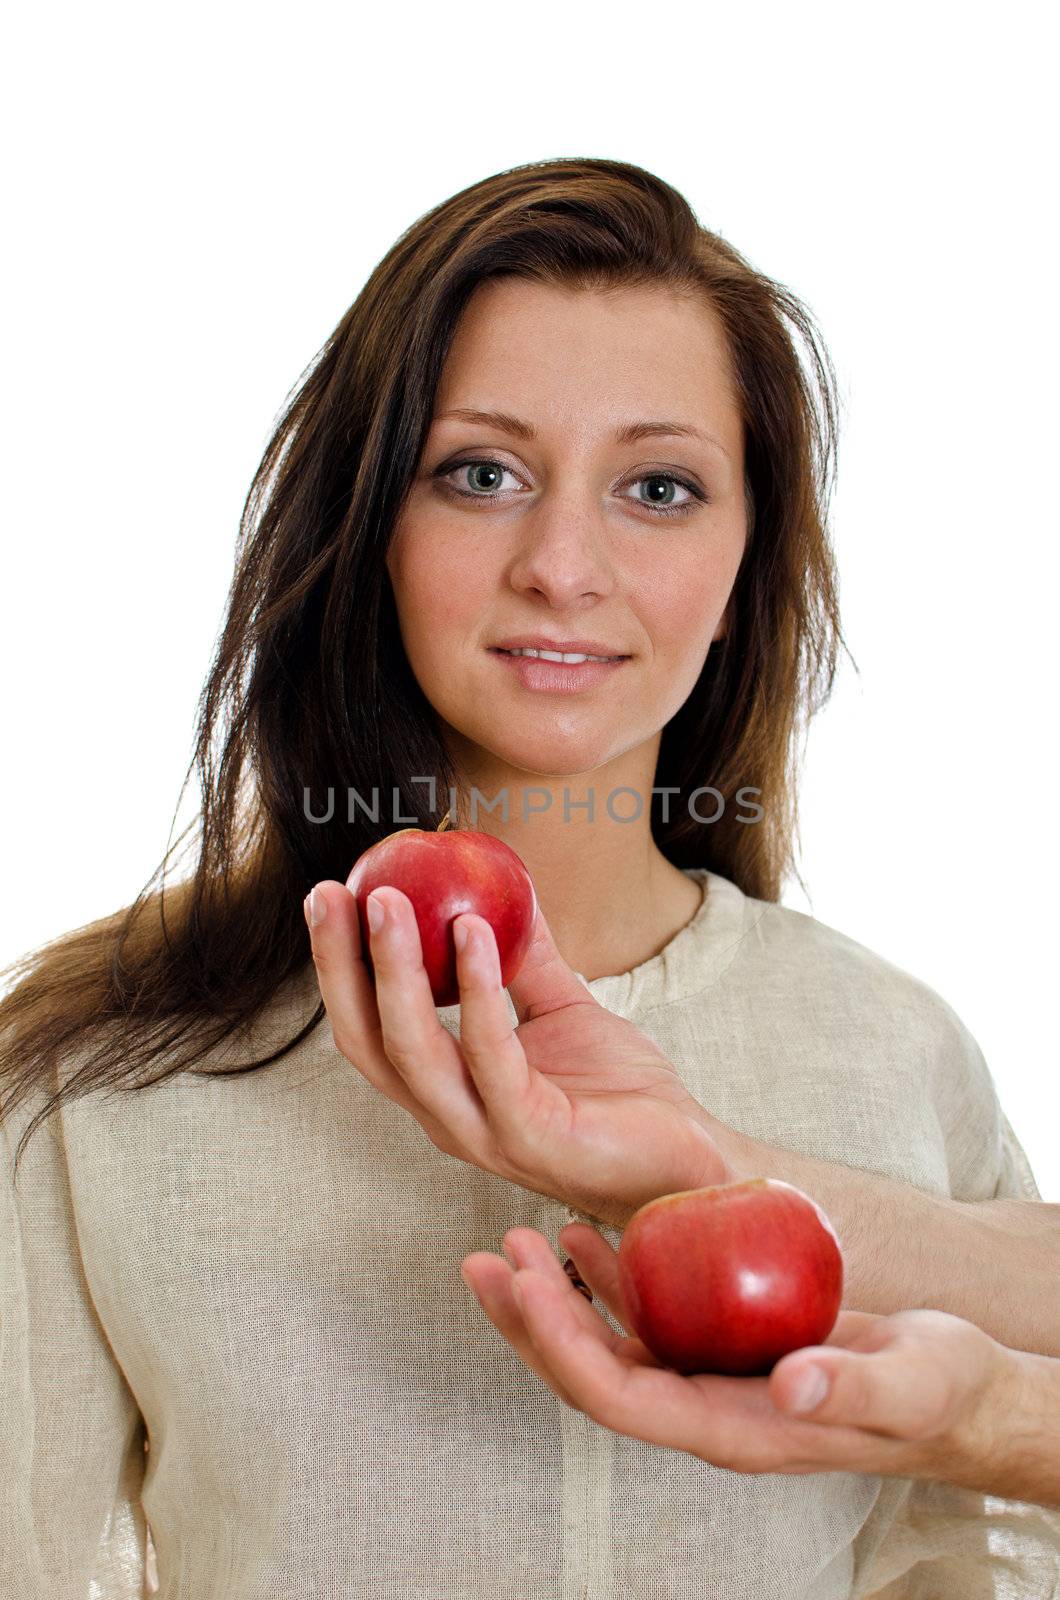 Two man's hand offering an apple to woman. Isolated on white.